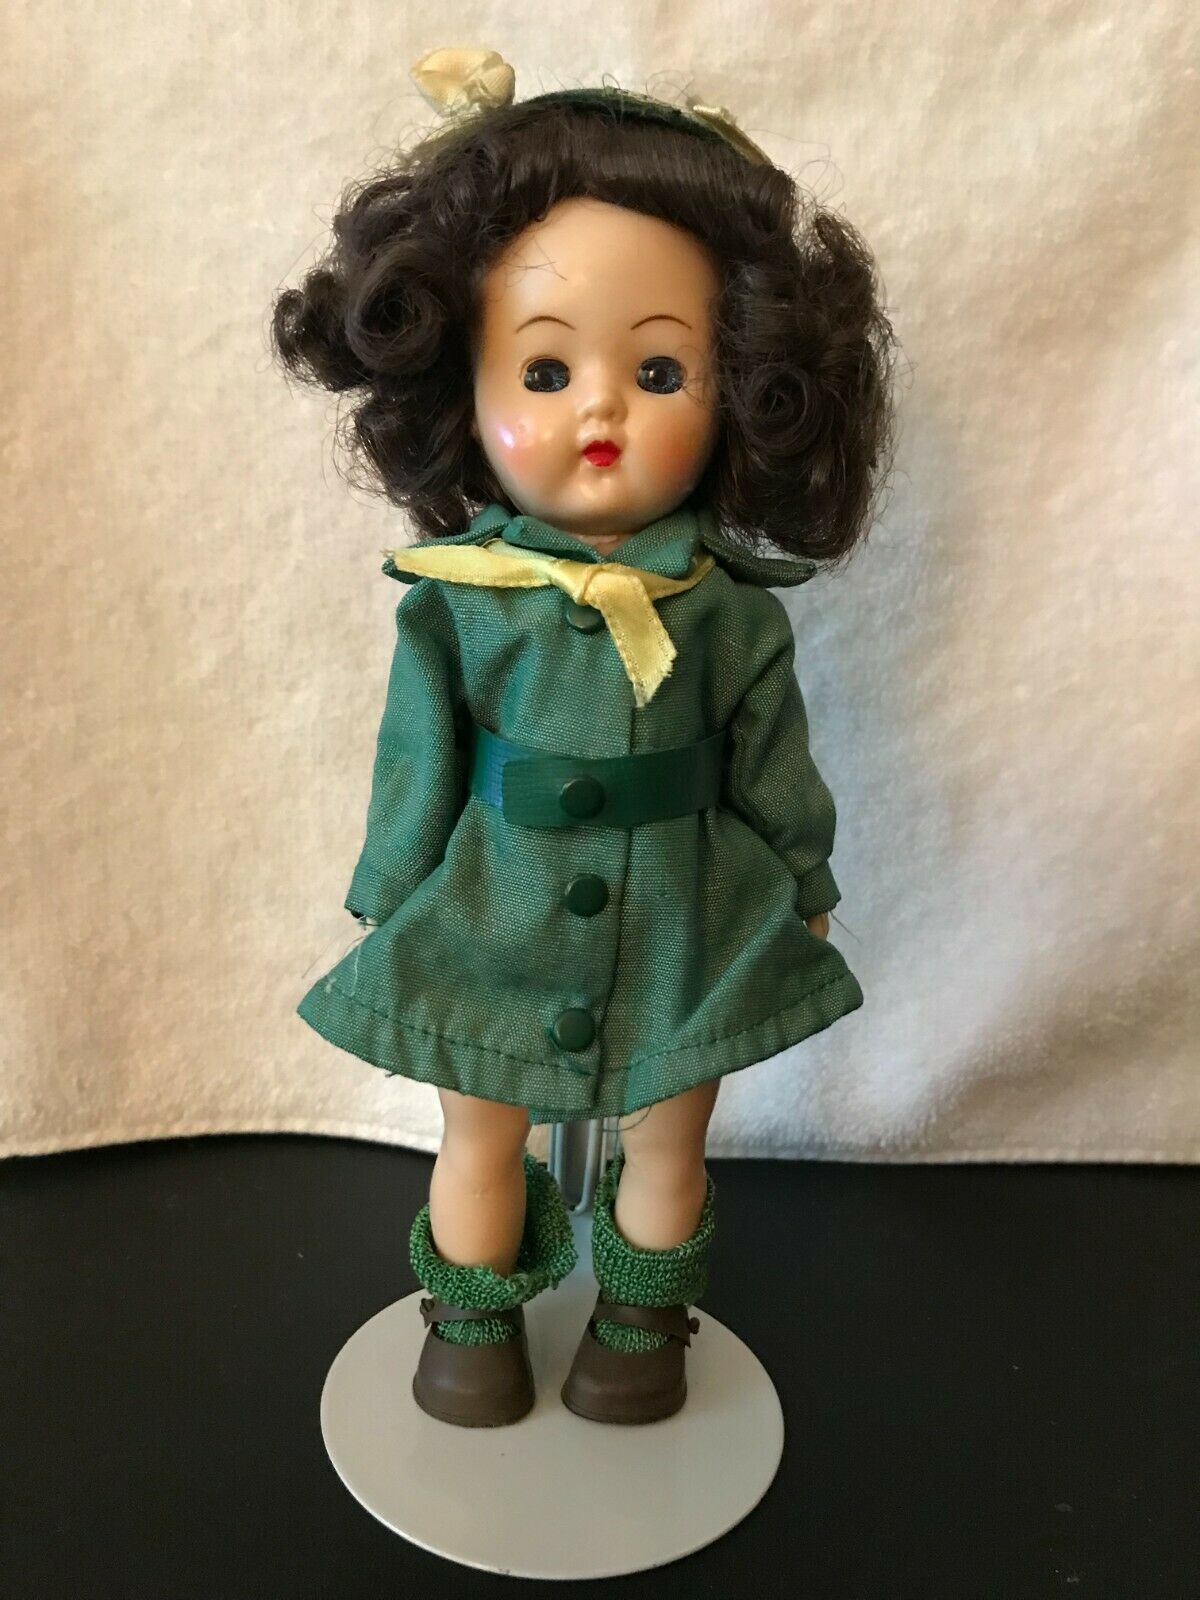 Official 1950's Girl Scout Doll - Ginger by Cosmopolitan